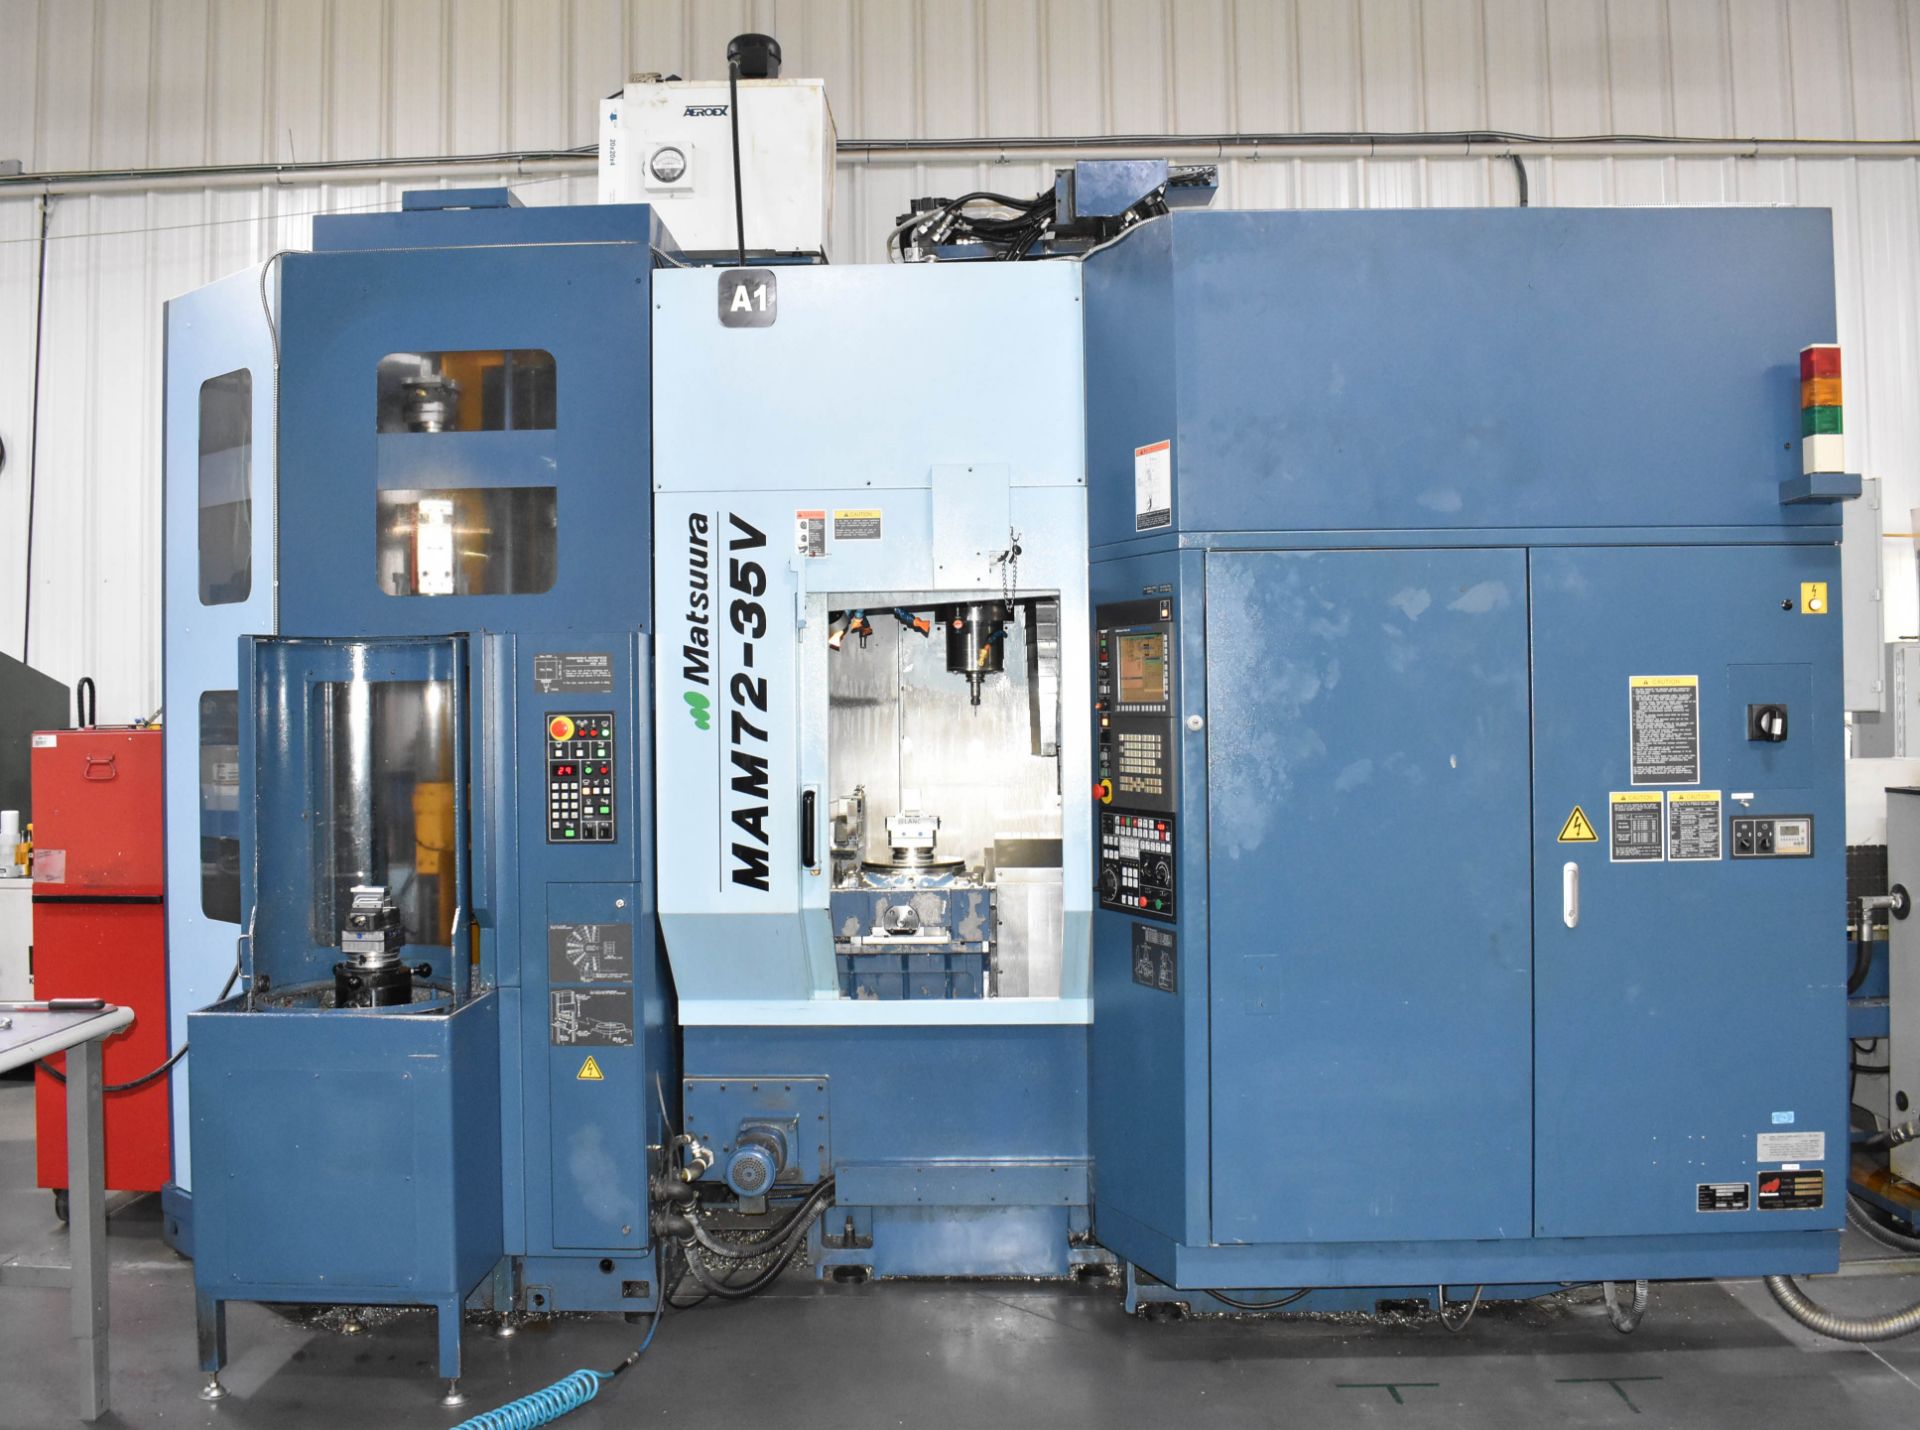 MATSUURA (2010) MAM72-35V MAXIA MULTI-PALLET FULL 5-AXIS HIGH-SPEED CNC VERTICAL MACHINING CELL WITH